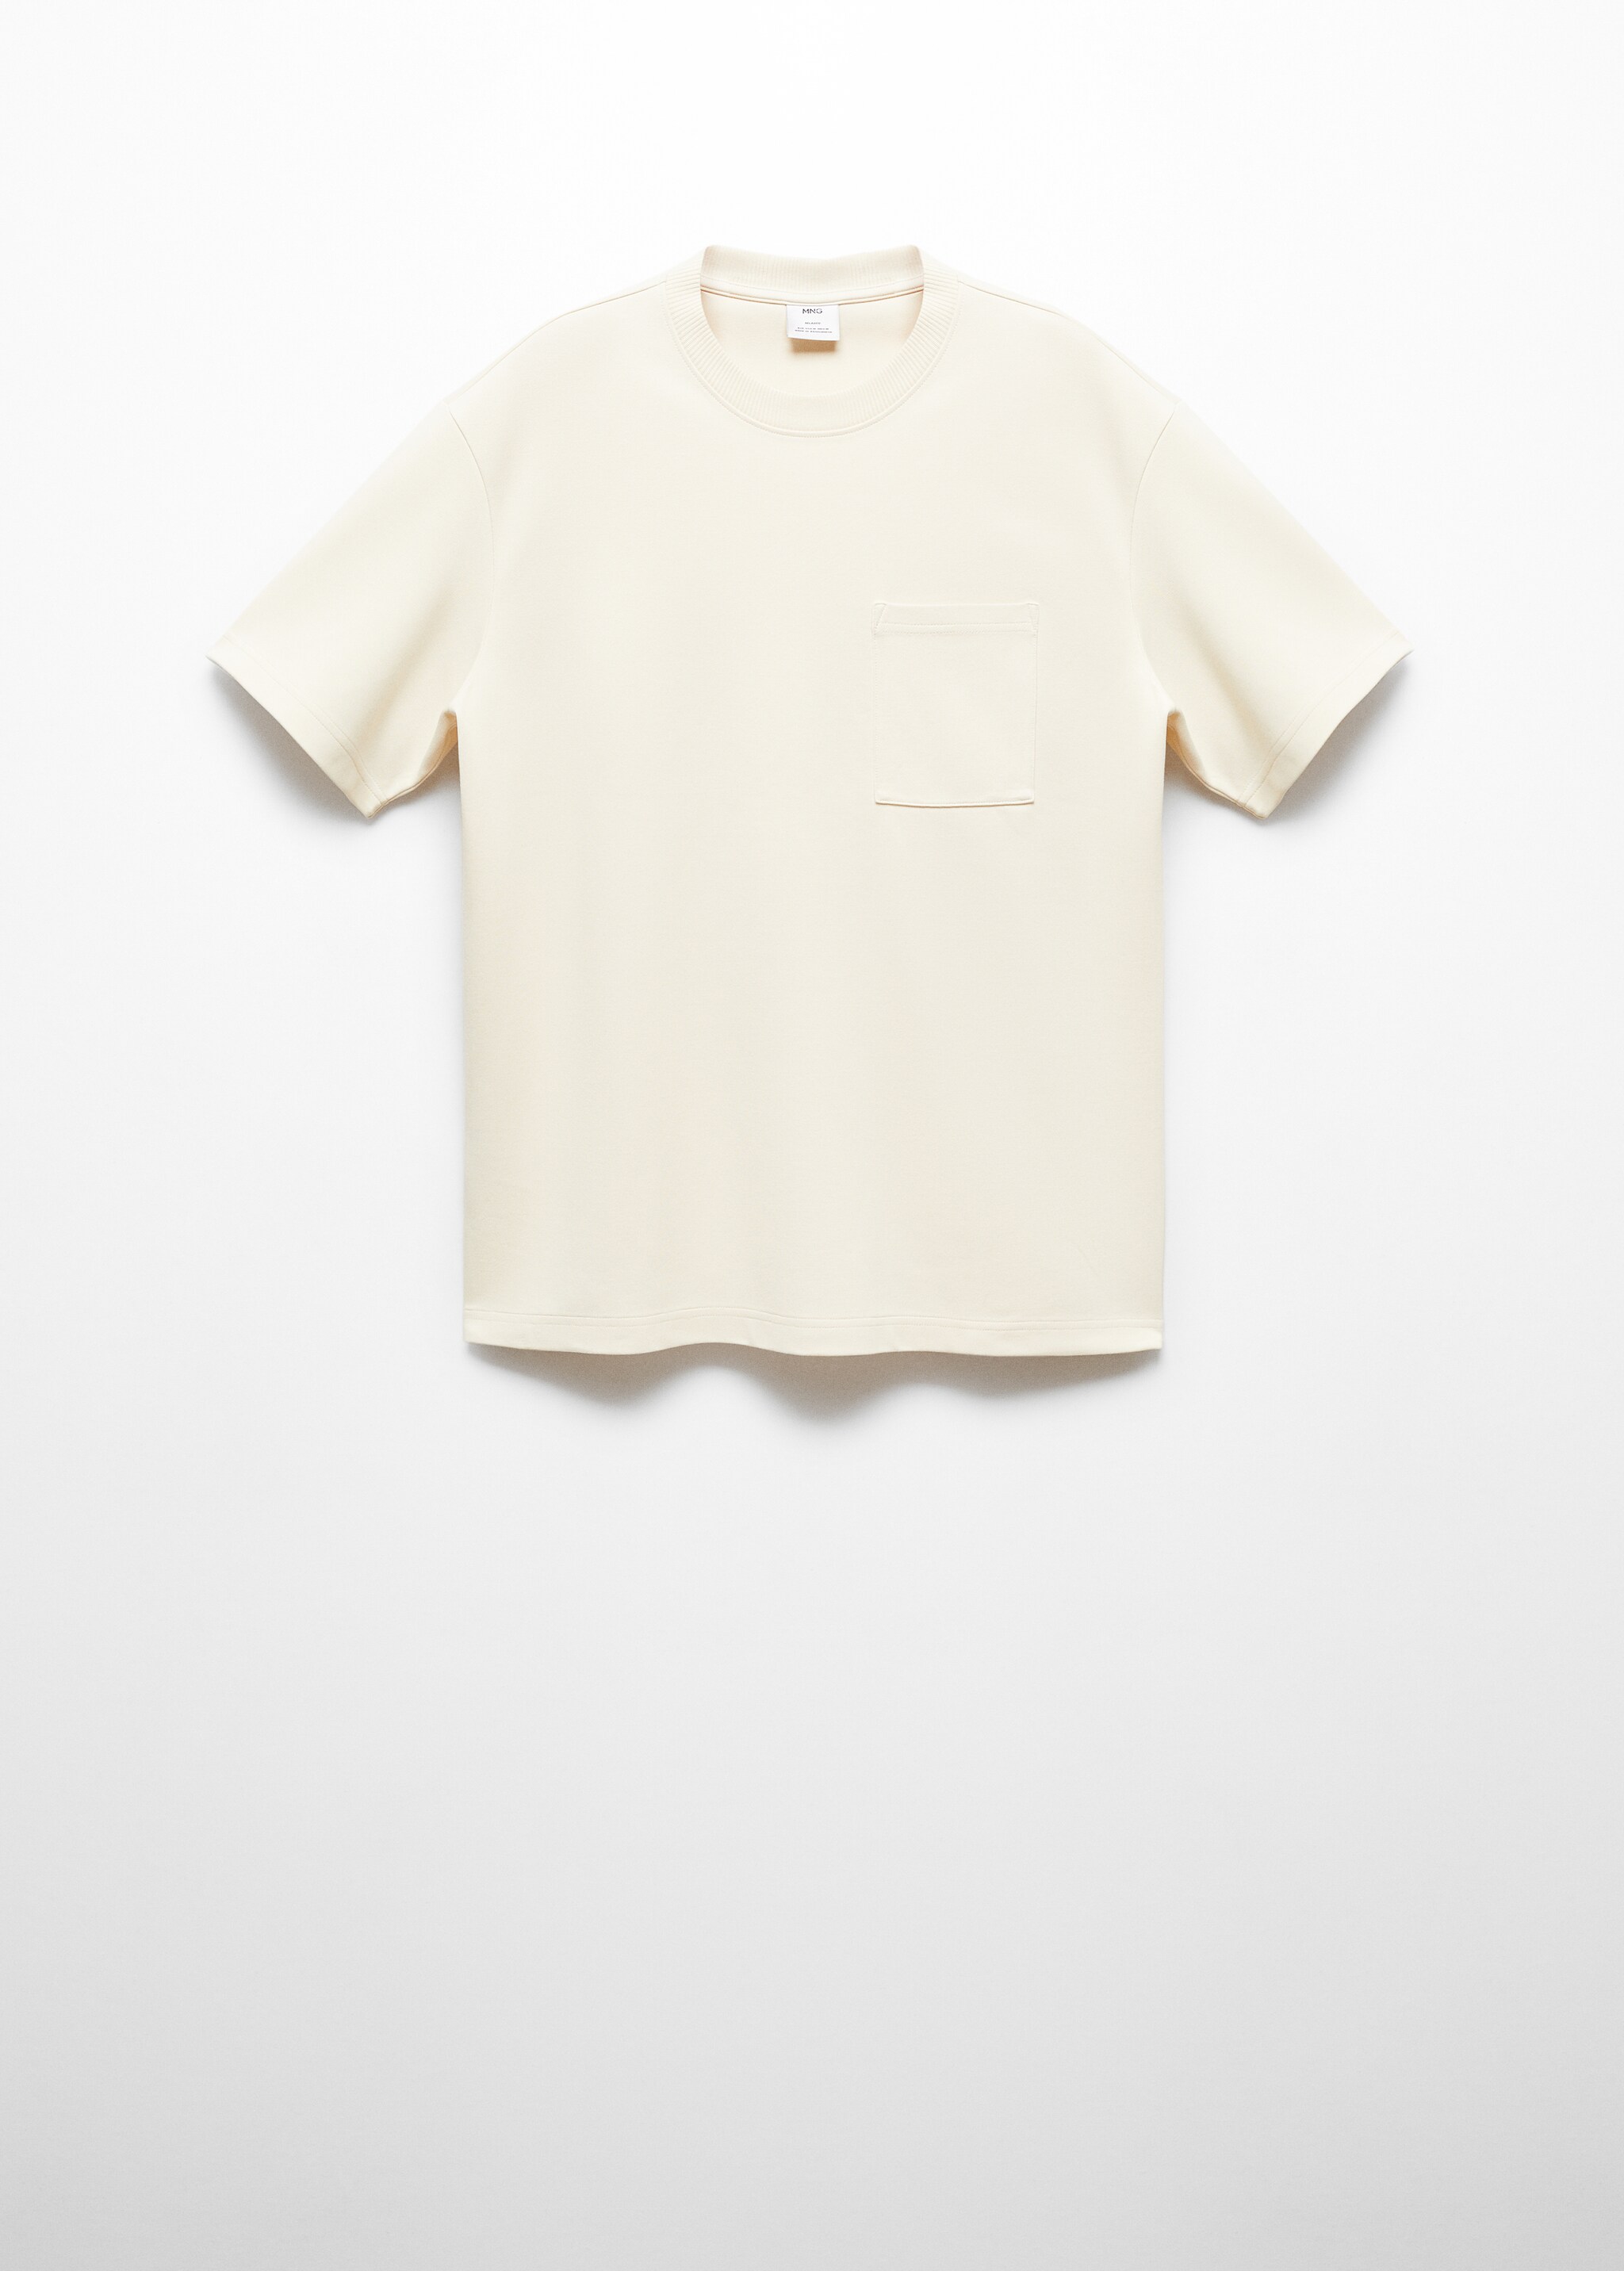 Relaxed fit pocket t-shirt - Article without model